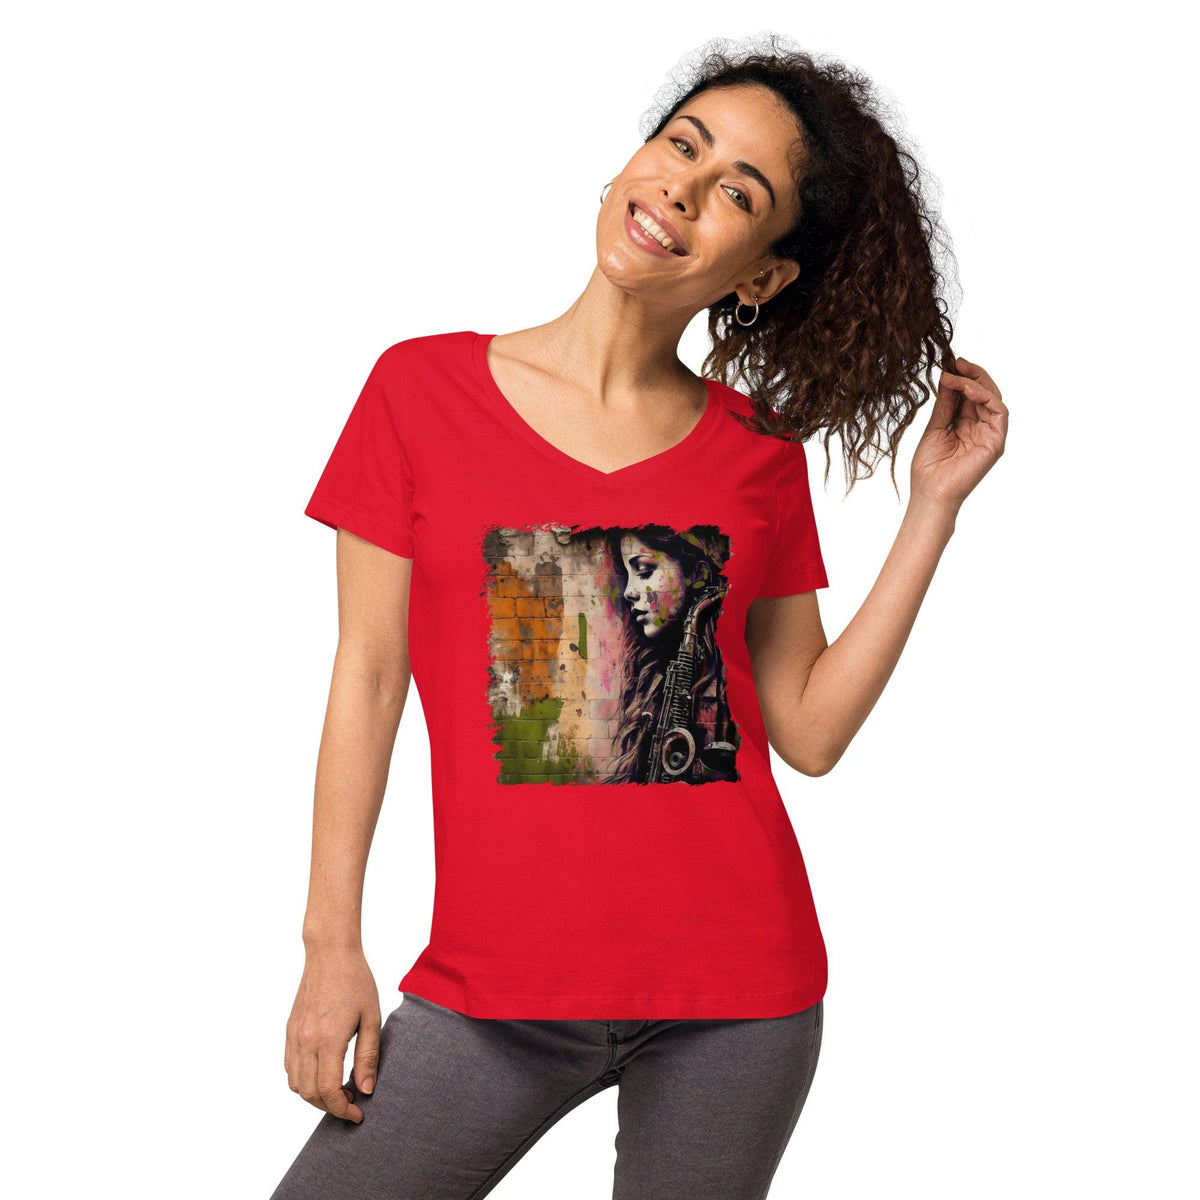 The Saxophone Empowers Her Women’s fitted v-neck t-shirt - Beyond T-shirts